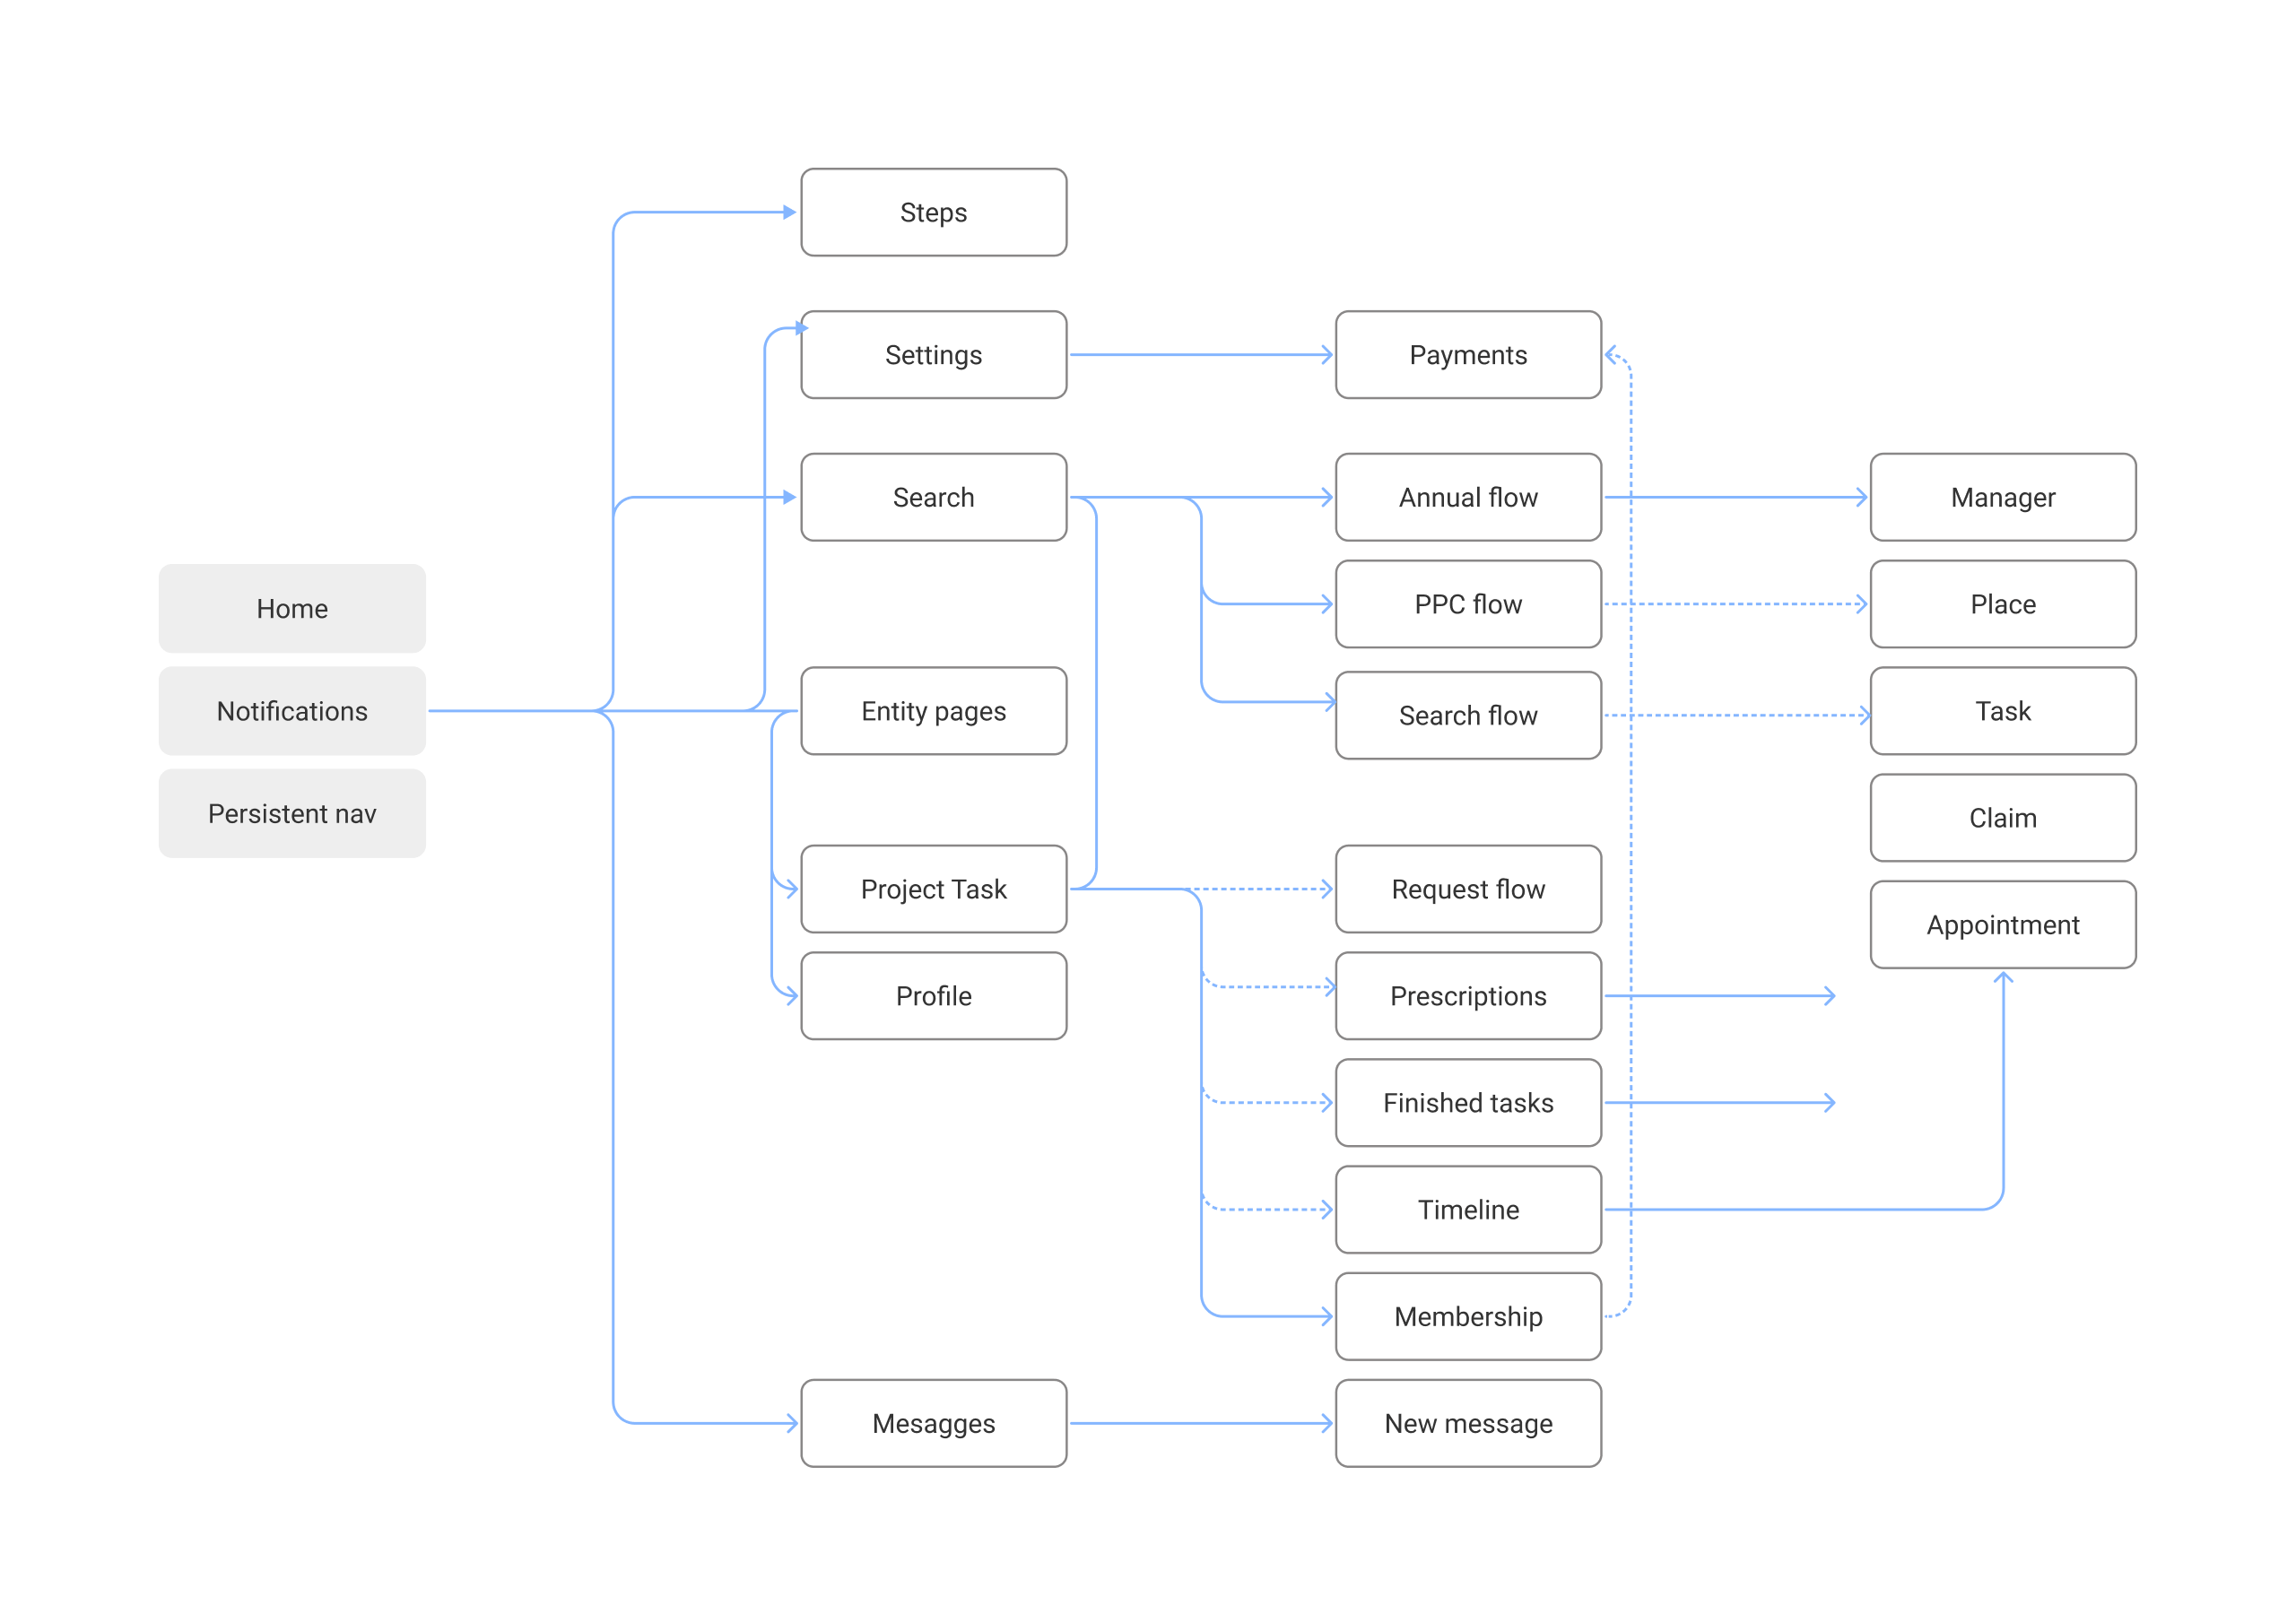 Example of a user flow diagram, also a part of the new product development process